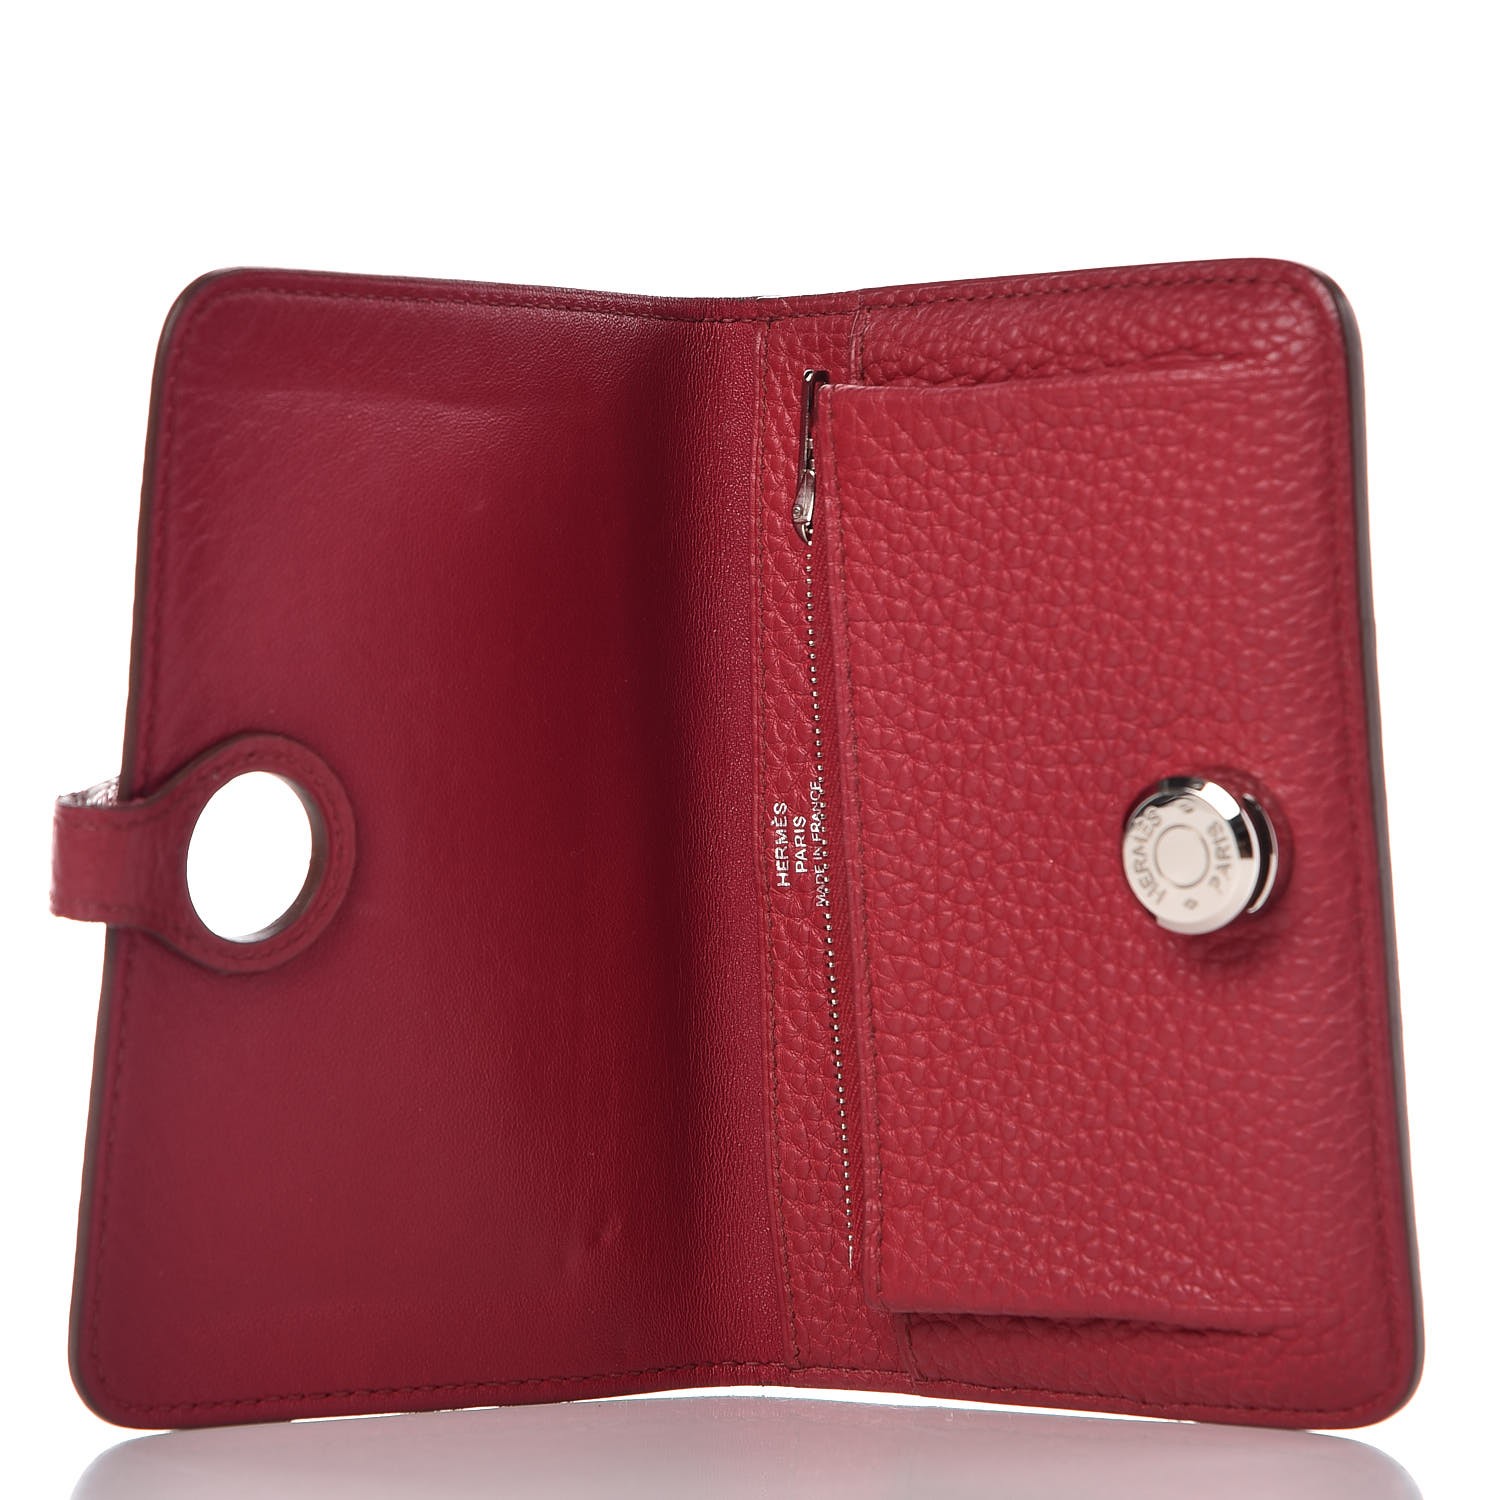 HERMES Togo Dogon Compact Wallet Rubis 310706